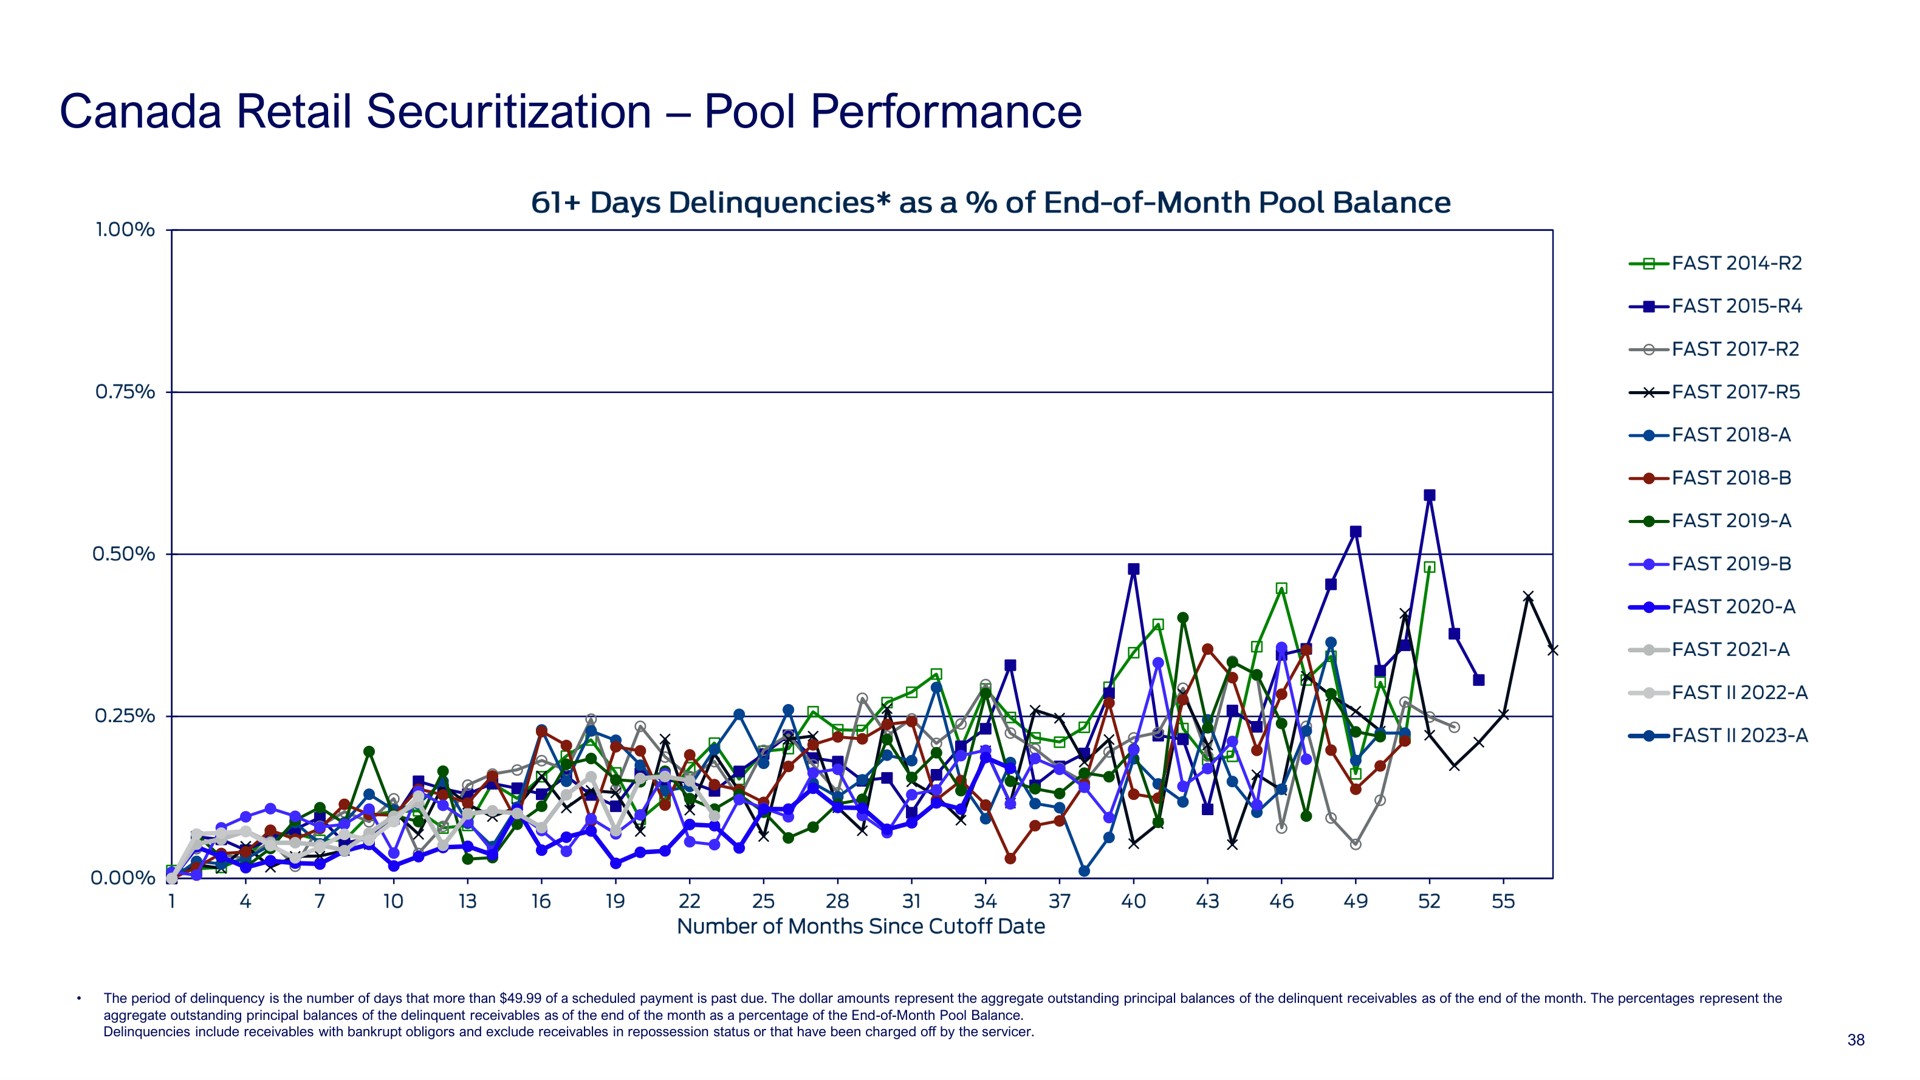 canada retail pool performance | Ford